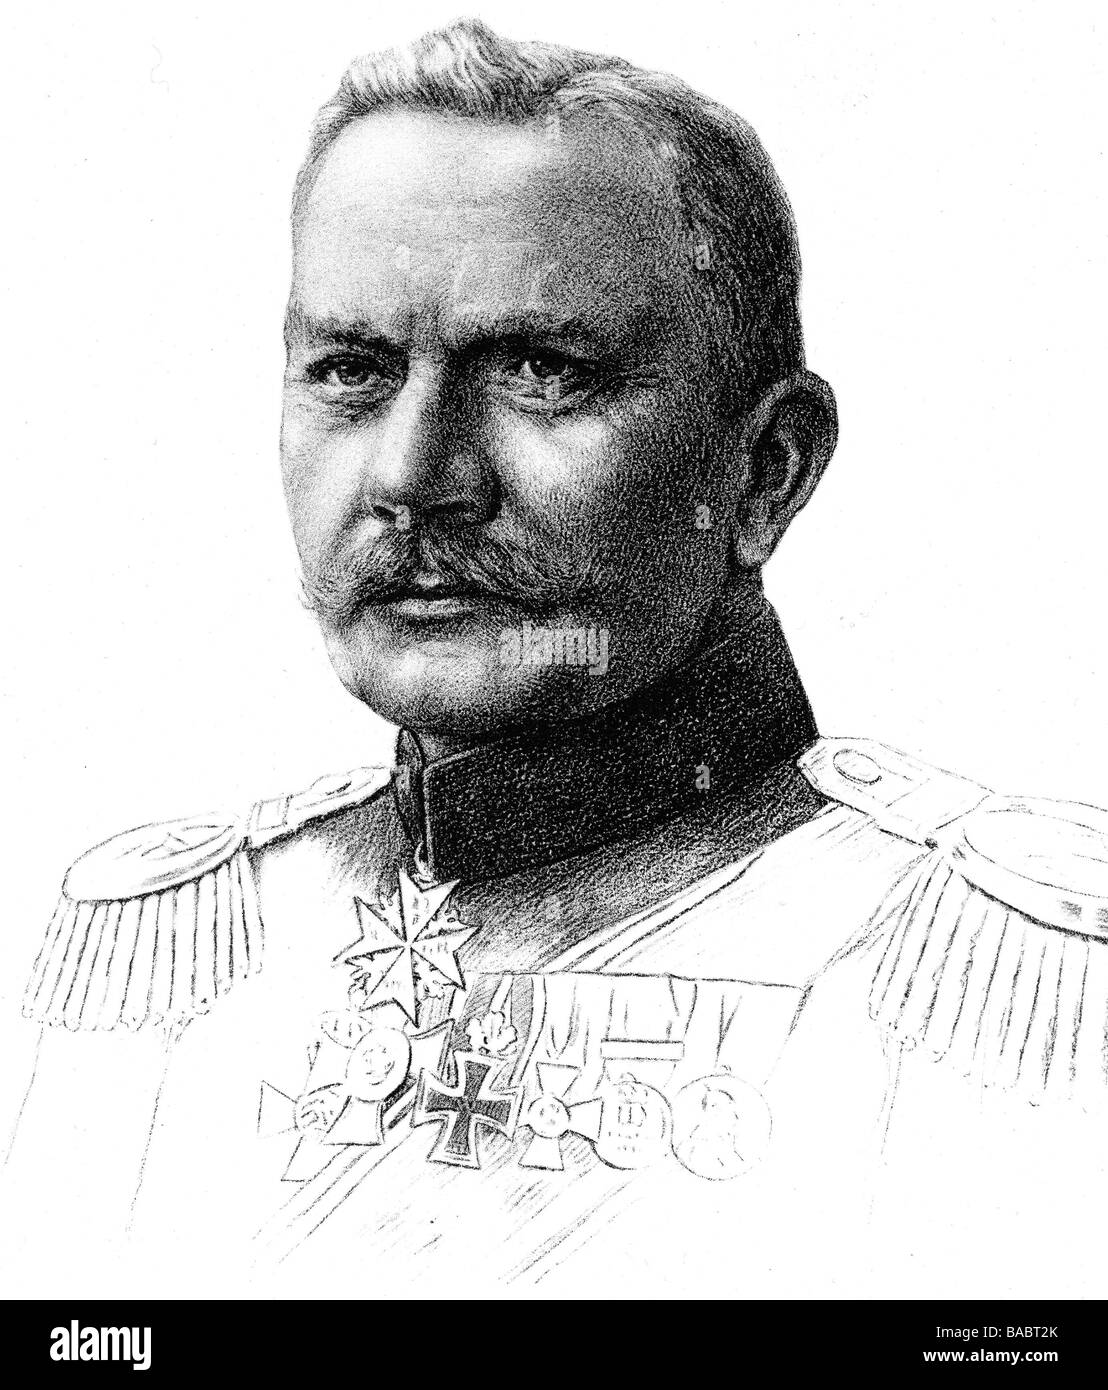 Emmich, Otto von, 4.8.1848 - 22.12.1915, German general, commander of the X Army Corps 1914 - 1915, portrait, etching, 1914, Stock Photo